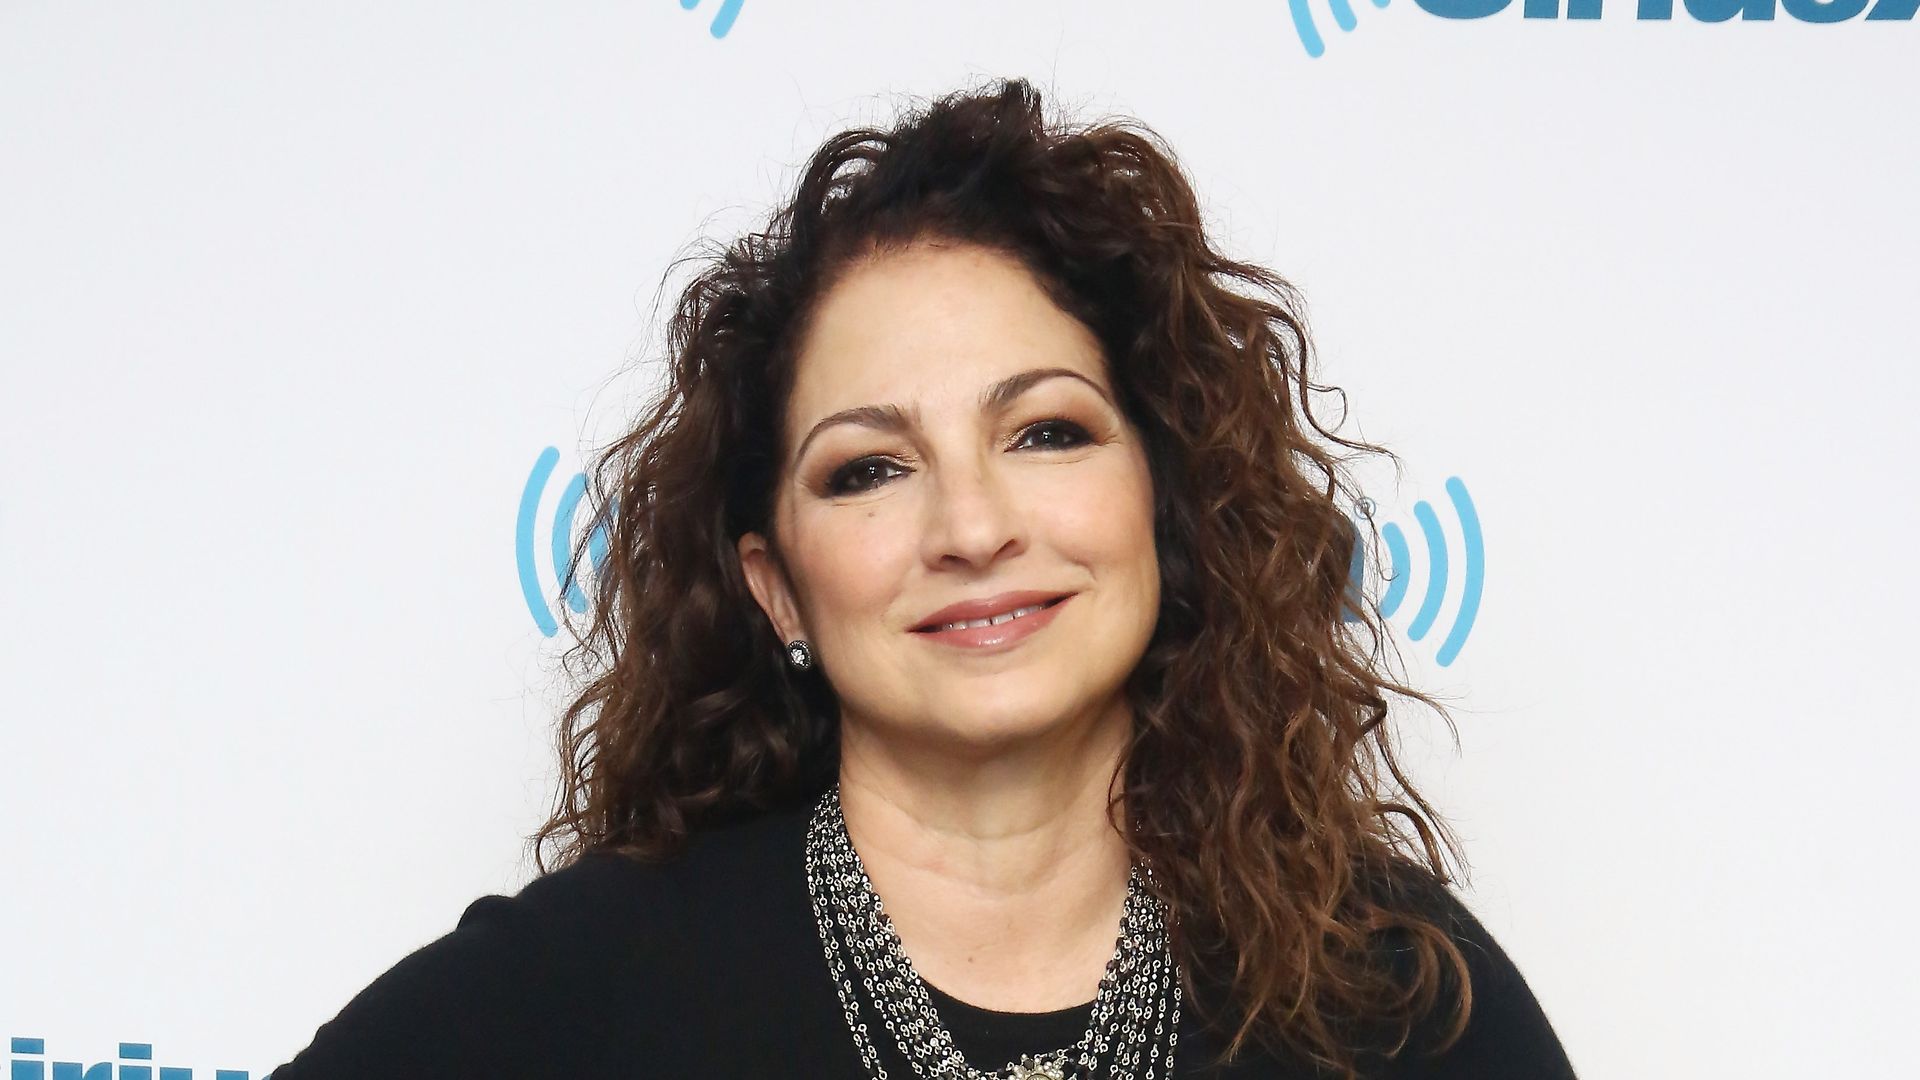 Singer-songwriter Gloria Estefan poses for a photo before she sits down with Larry Flick for SiriusXM's 'Leading Ladies' series at the SiriusXM Studios on June 2, 2016 in New York City.